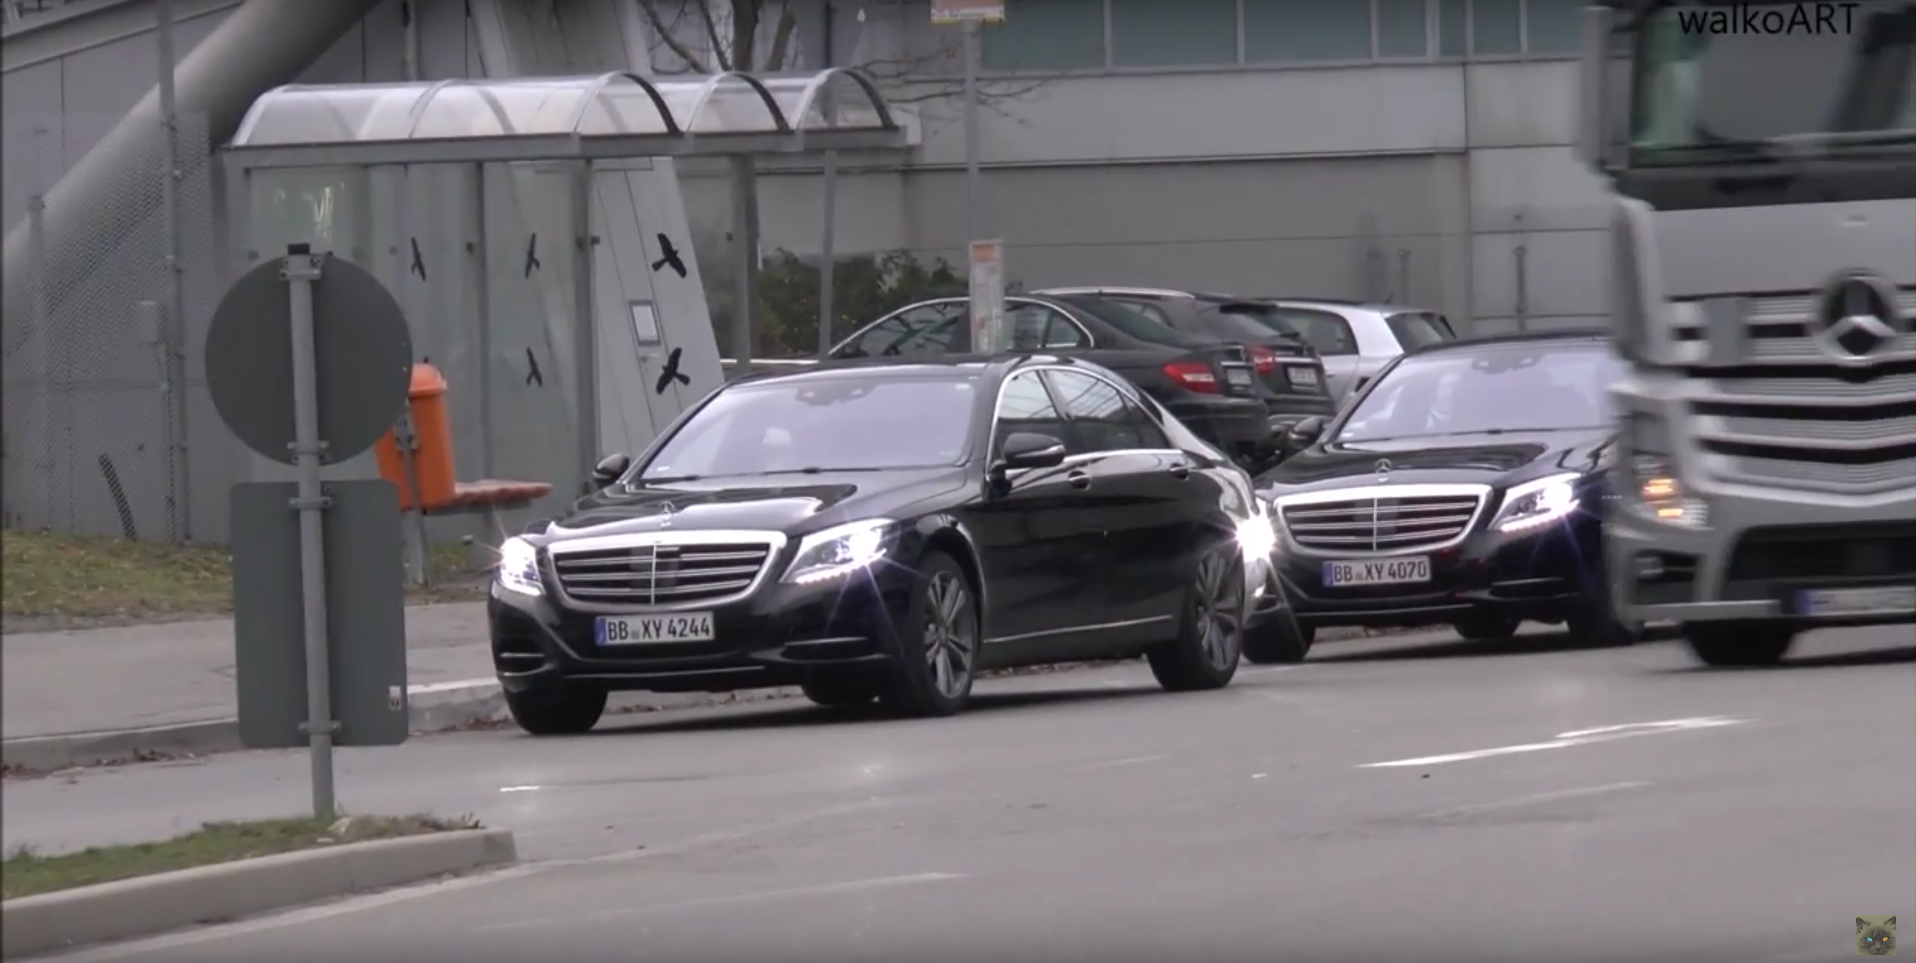 2018 Mercedes Benz S Class Facelift Caught In Motion With No